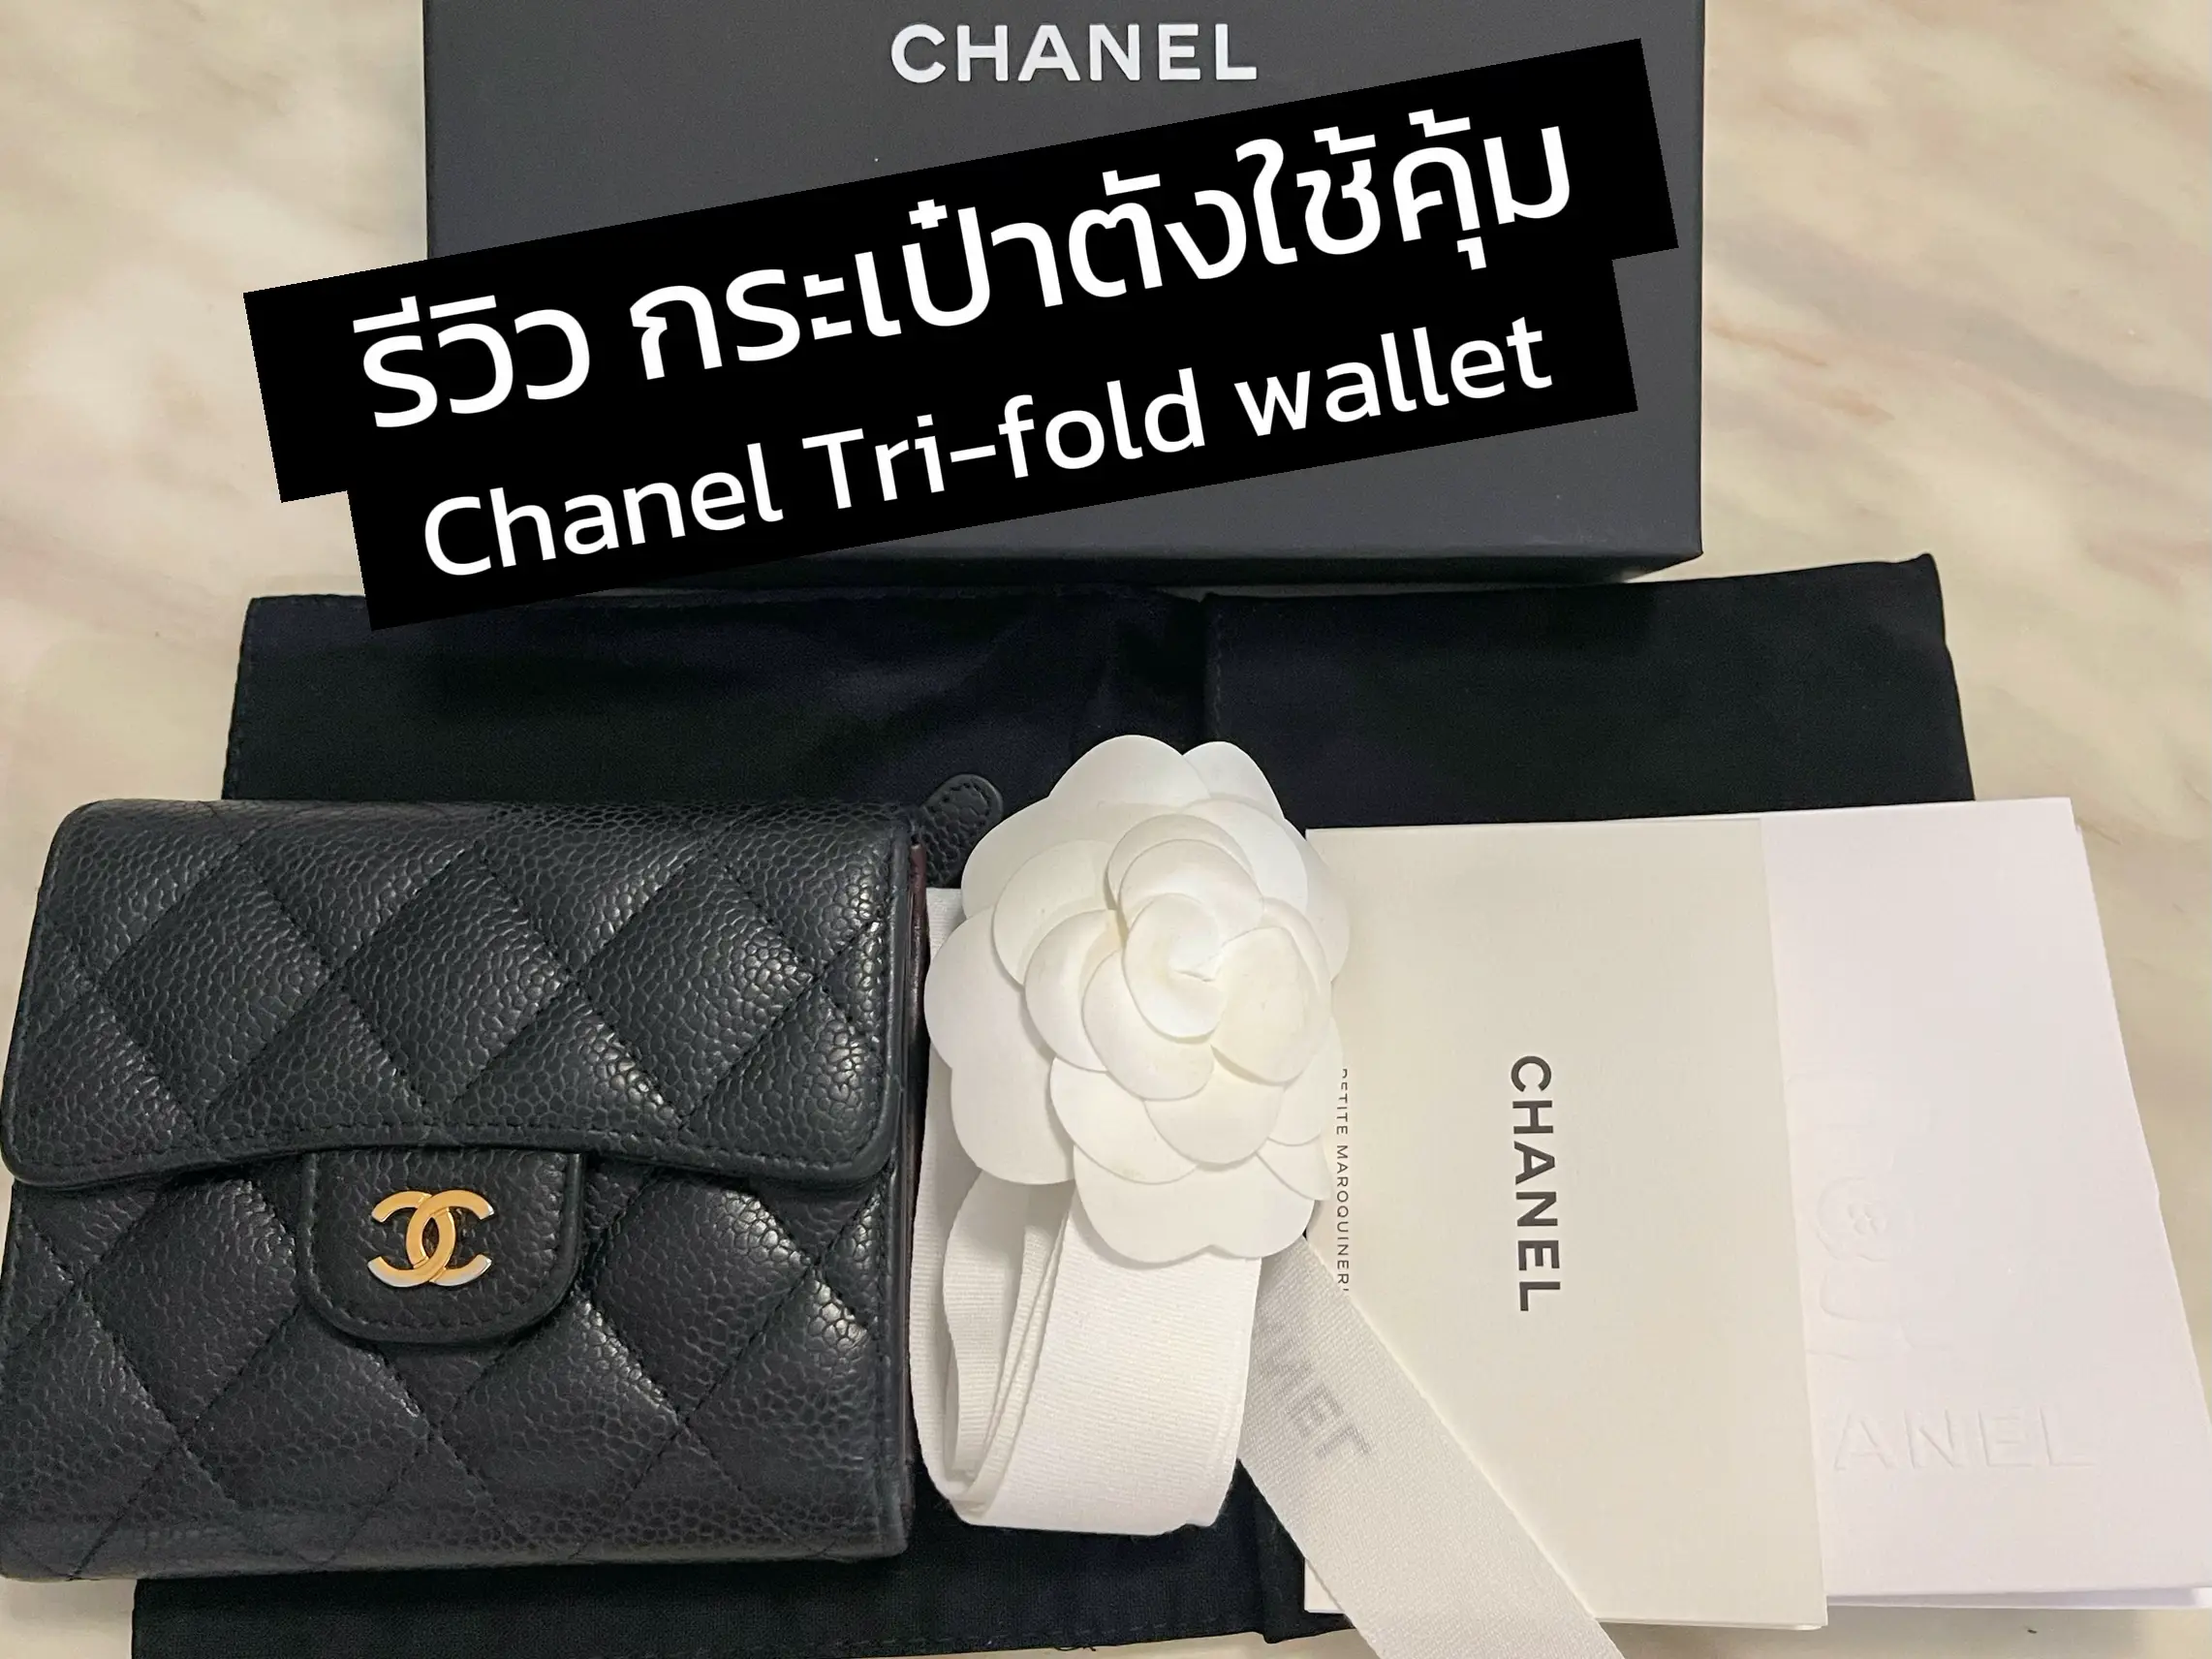 Review Chanel Value Purse, Gallery posted by Cnarinn